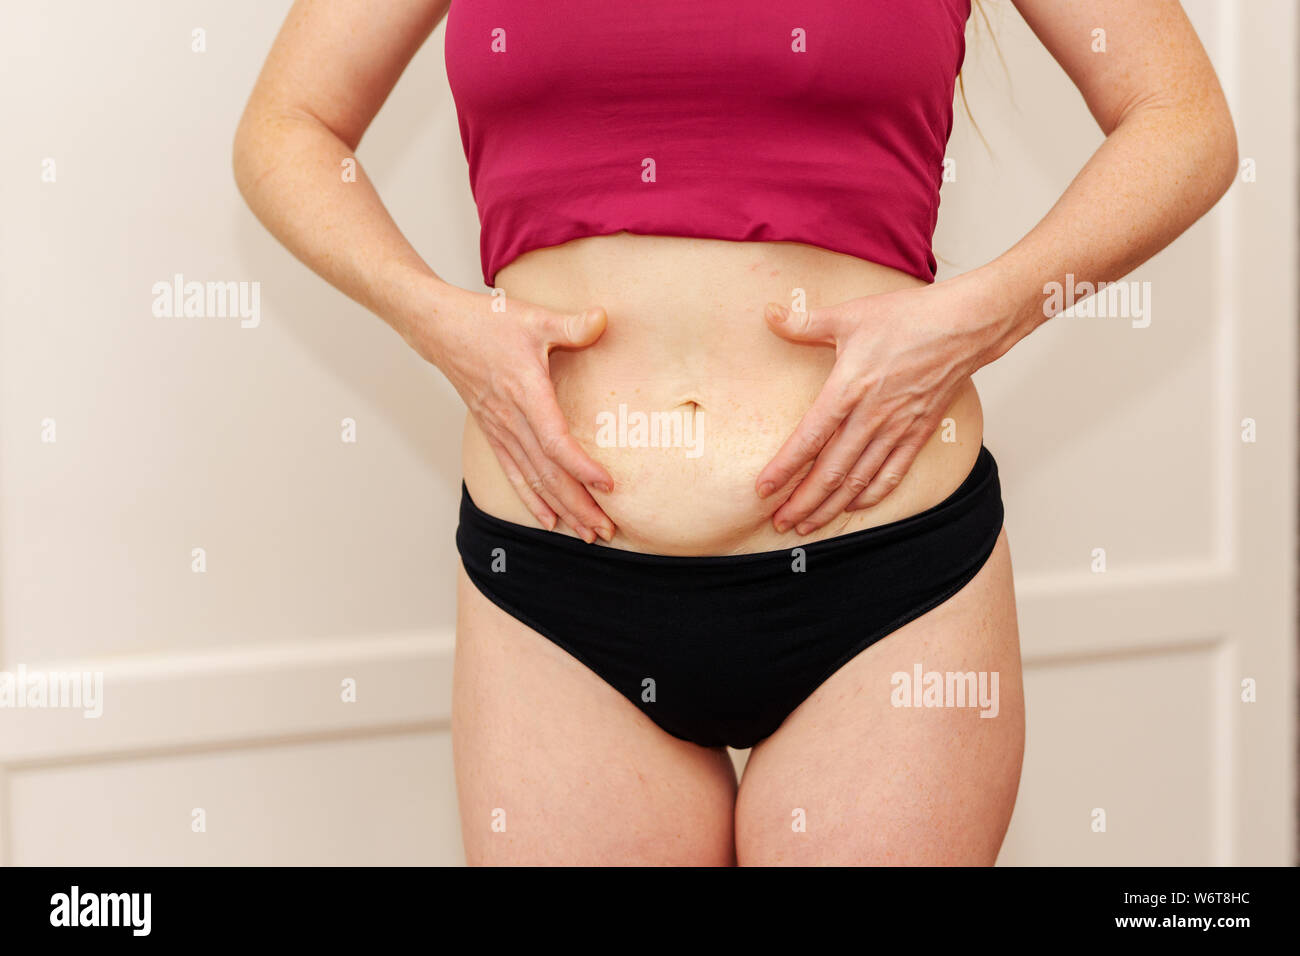 https://c8.alamy.com/comp/W6T8HC/women-show-off-the-belly-after-birth-stretch-marks-on-white-background-women-body-fat-belly-front-view-W6T8HC.jpg